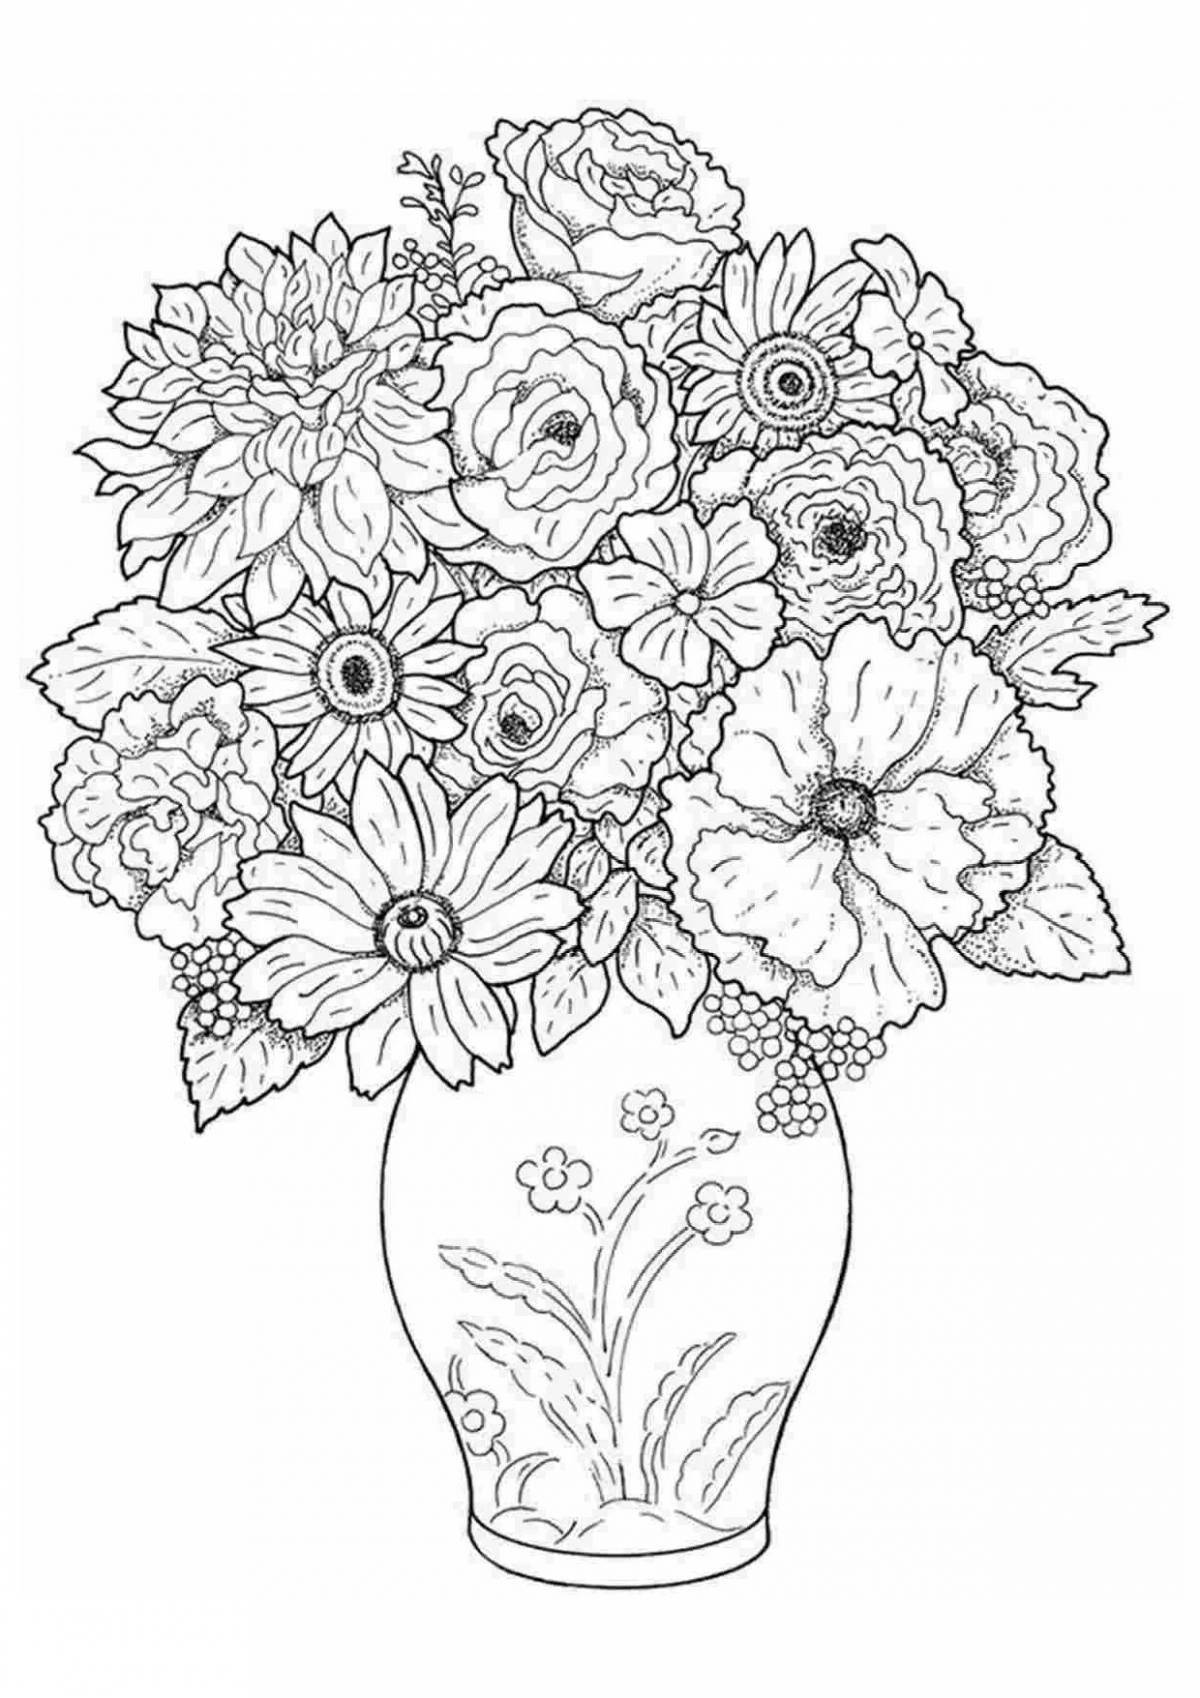 Coloring page gorgeous bouquet in a vase